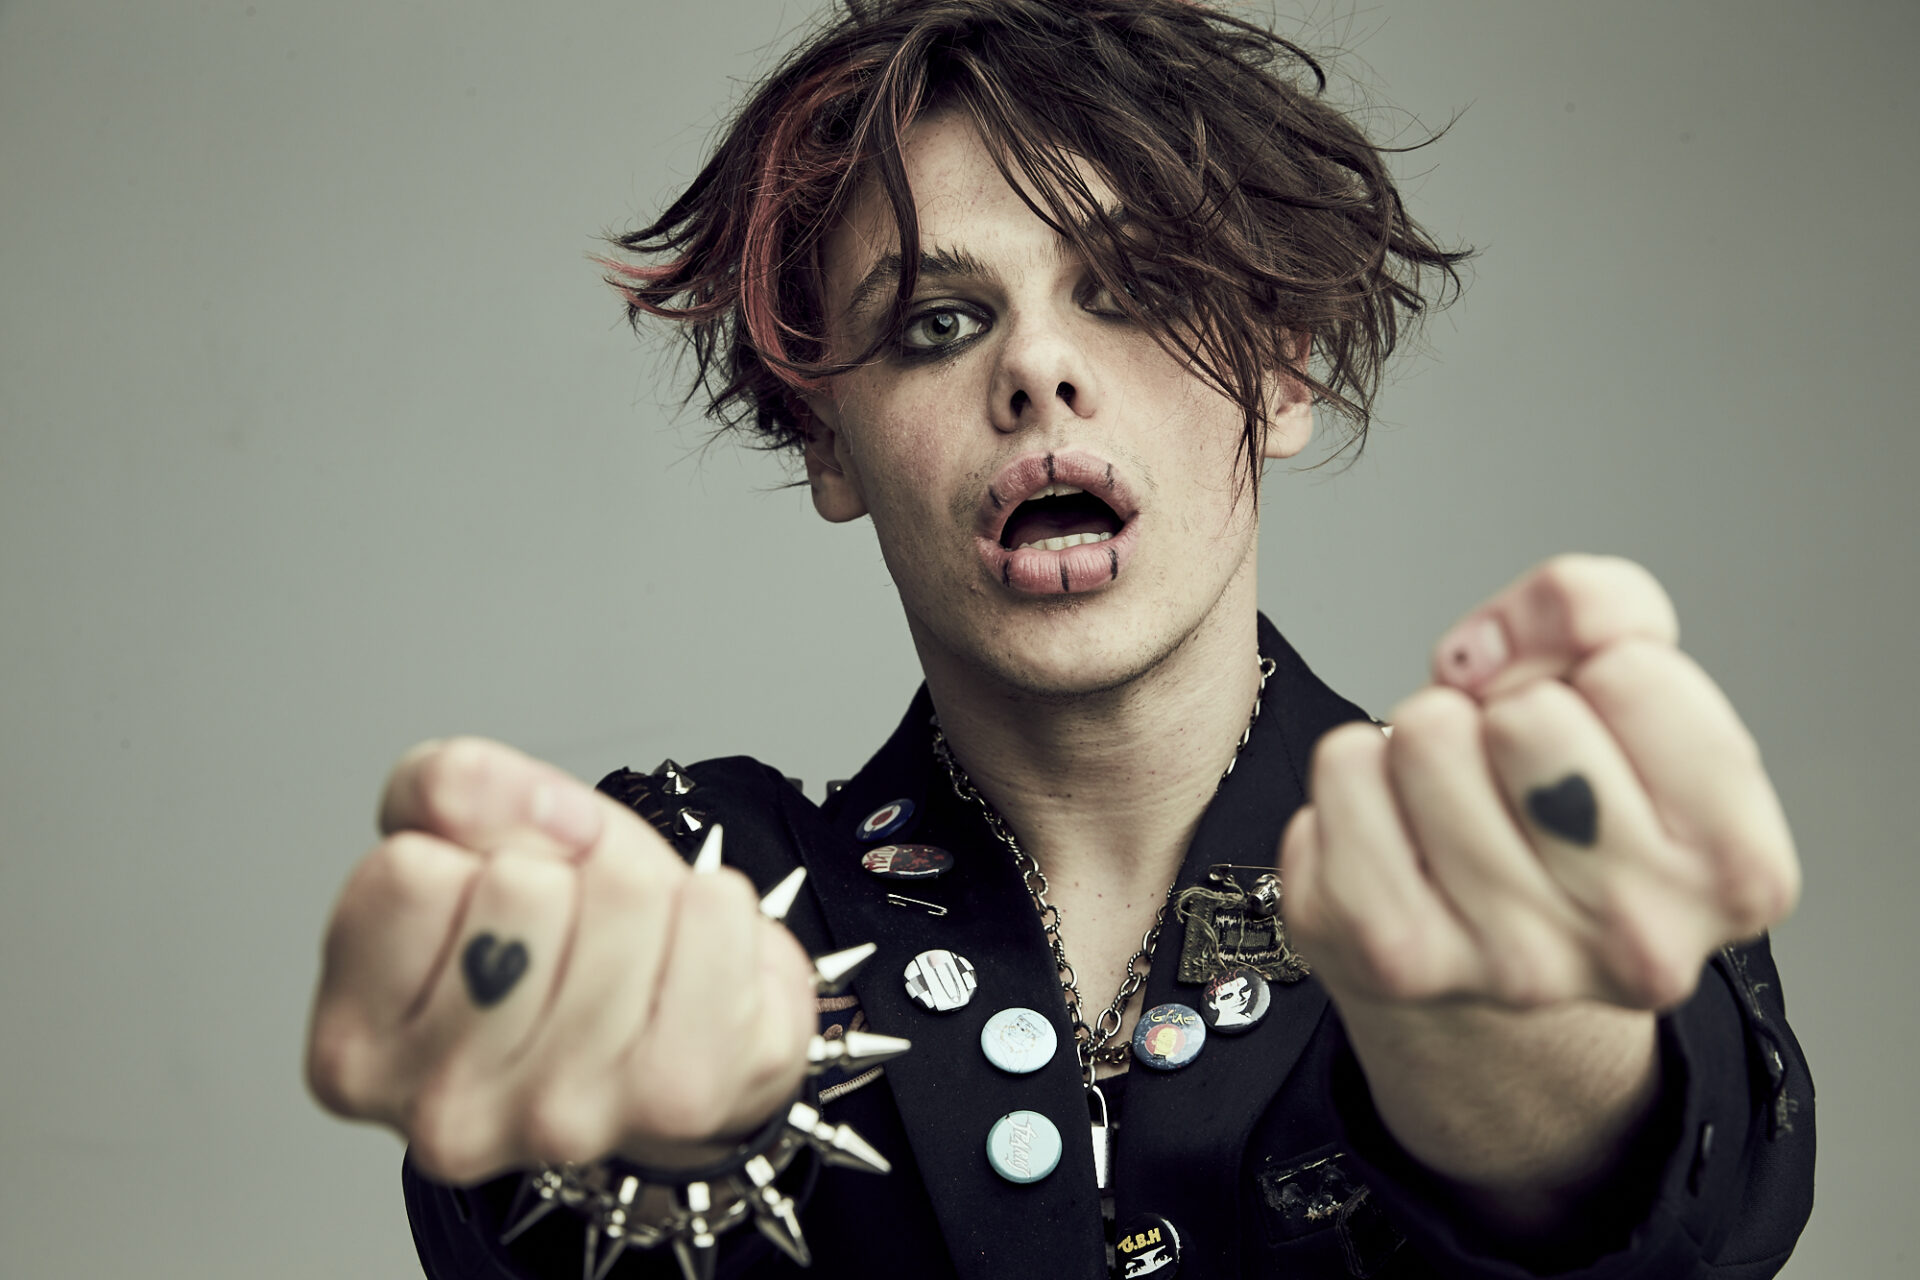 YUNGBLUD fights his inner demons in new video, ‘Die A Little’